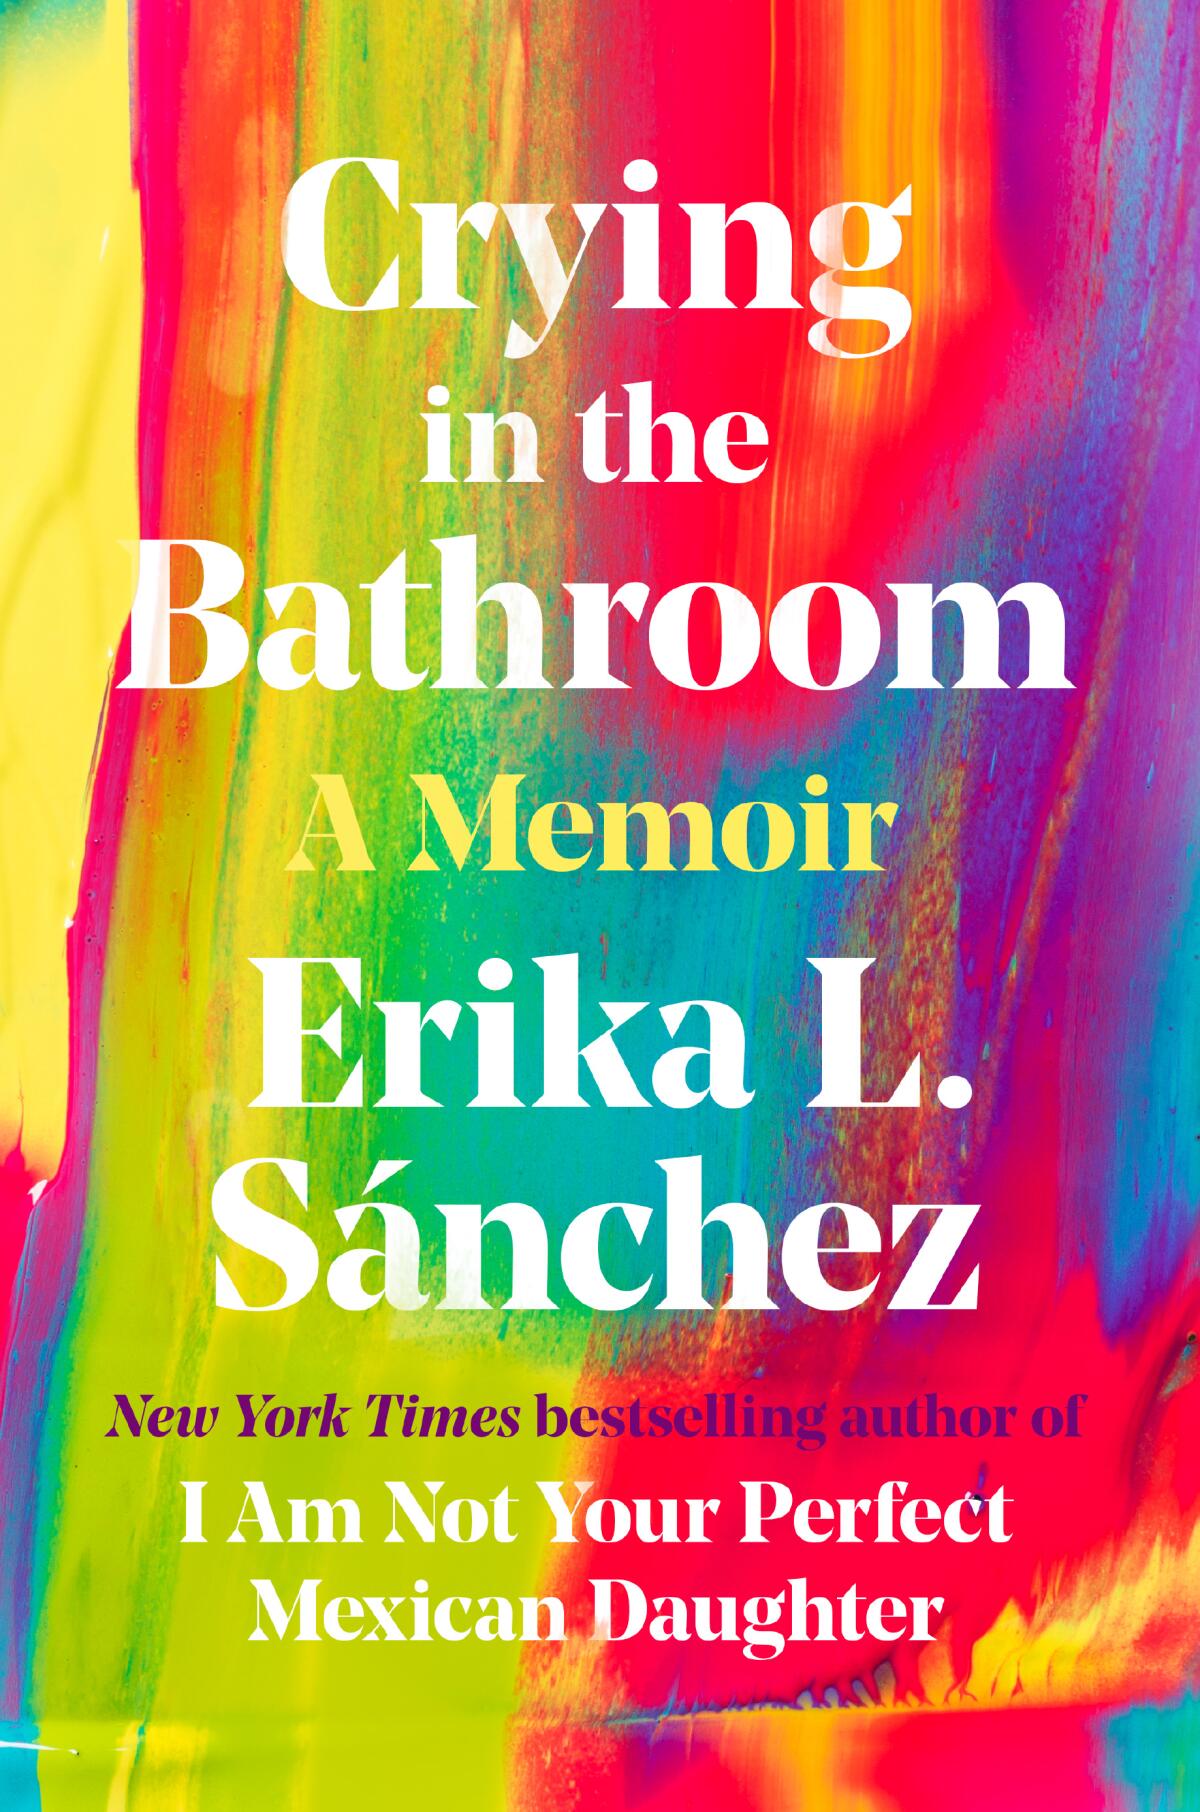 "Crying in the Bathroom," by Erika L. Sánchez